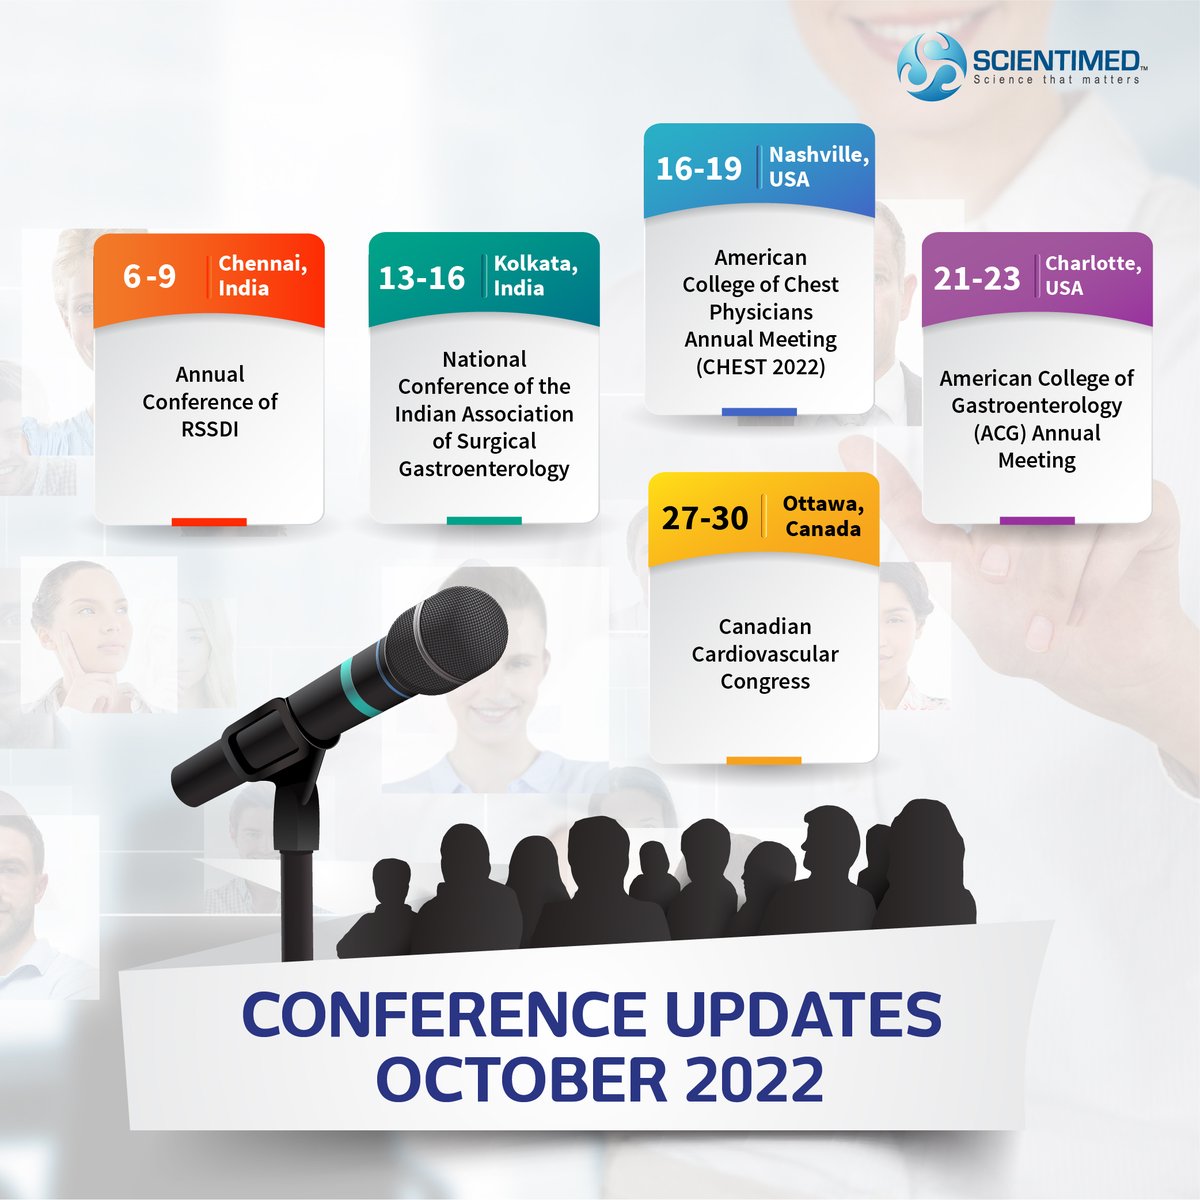 National and international conference updates for October 2022.
 
#conference #conferenceupdates #octoberconferences #nationalconferences #internationalconferences #Scientimed

Follow us for more updates and visit our website scientimed.com for details on our services.